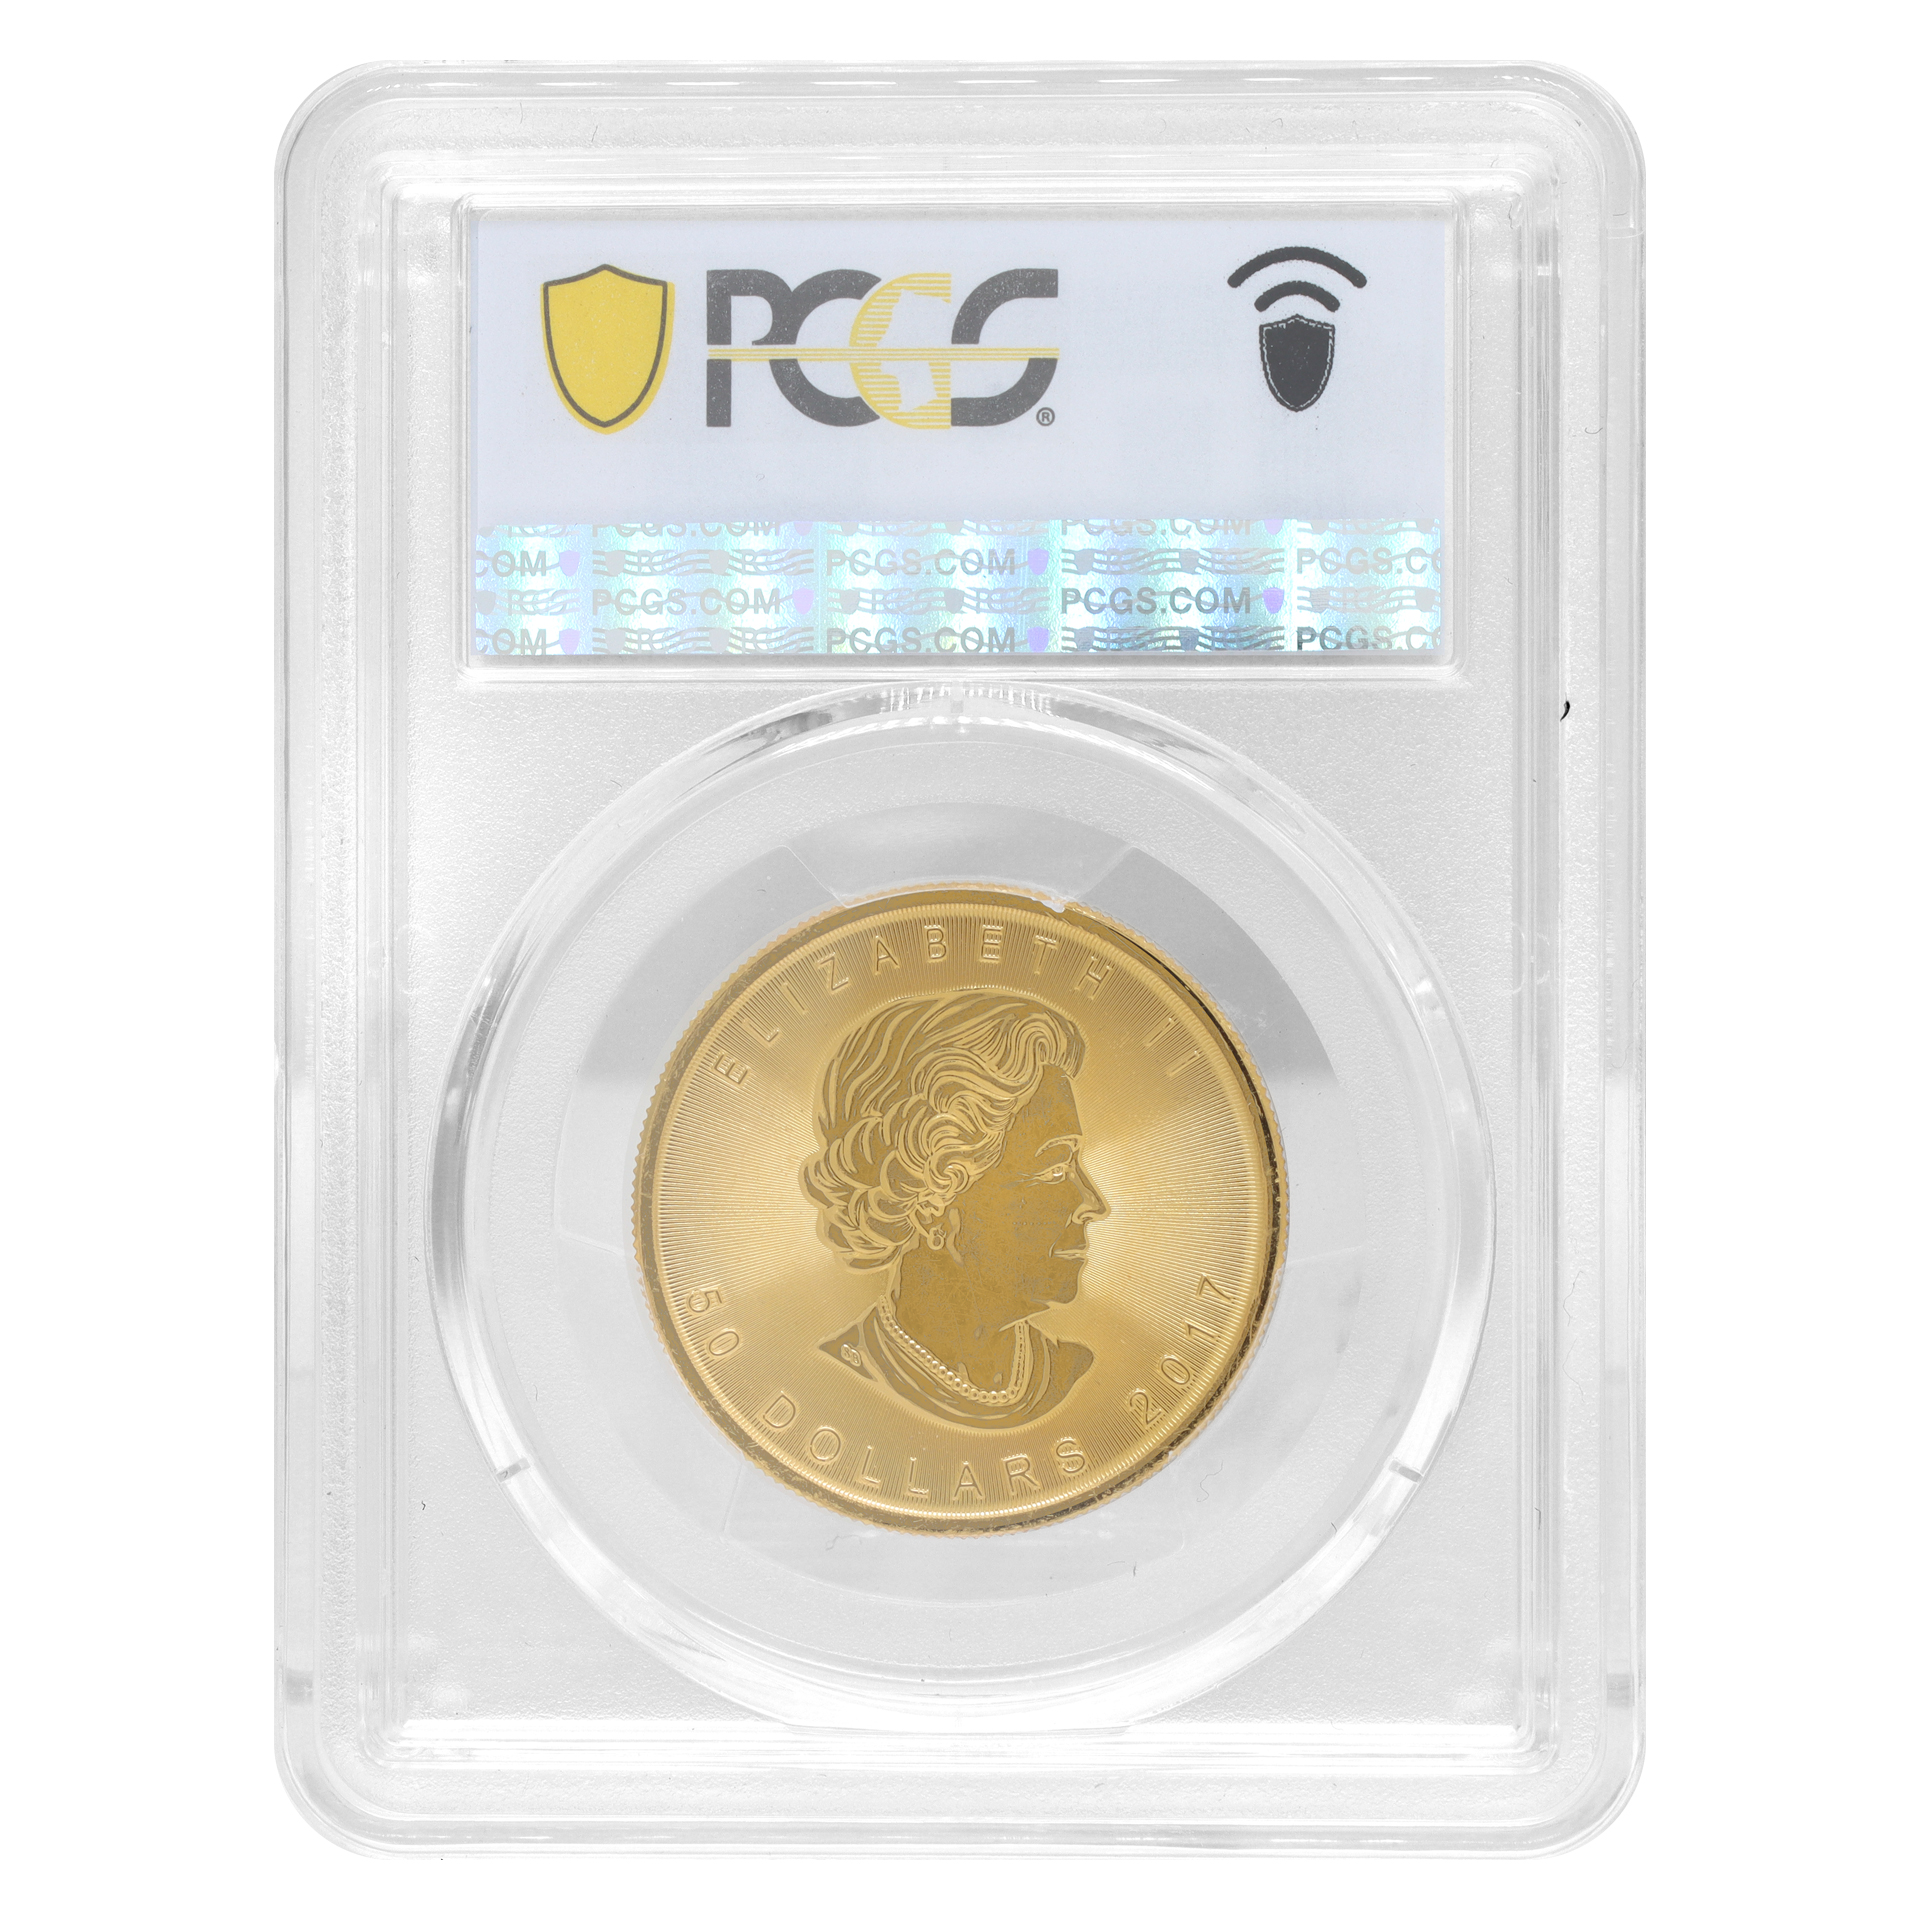 Canadian Maple Leaf $50 gold coin. 2017 PCGS MS64